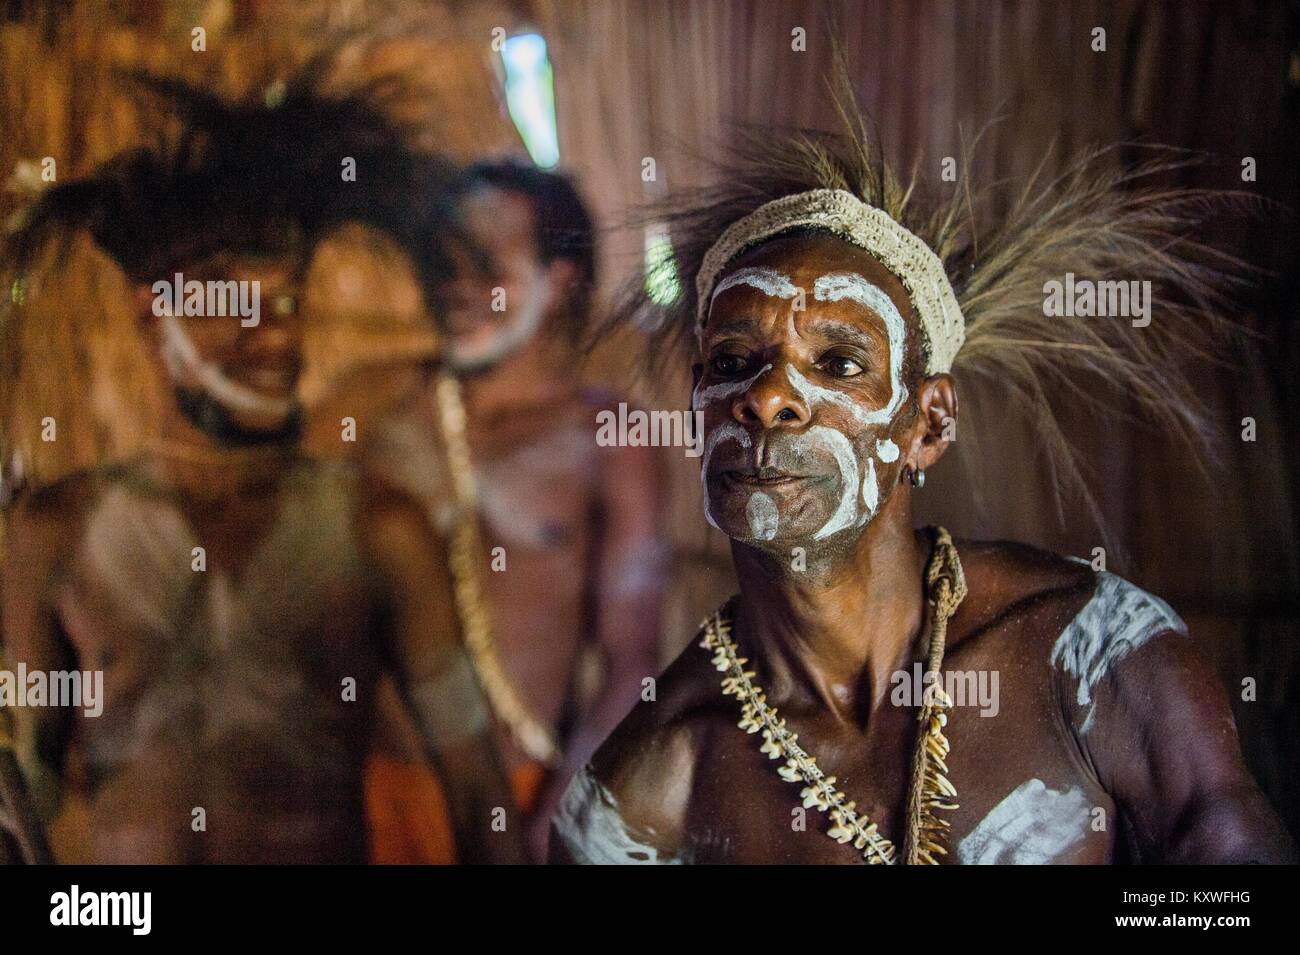 Portrait of a man from the tribe of Asmat people in the ritual face painting.  New Guinea. May 23, 2016 Stock Photo